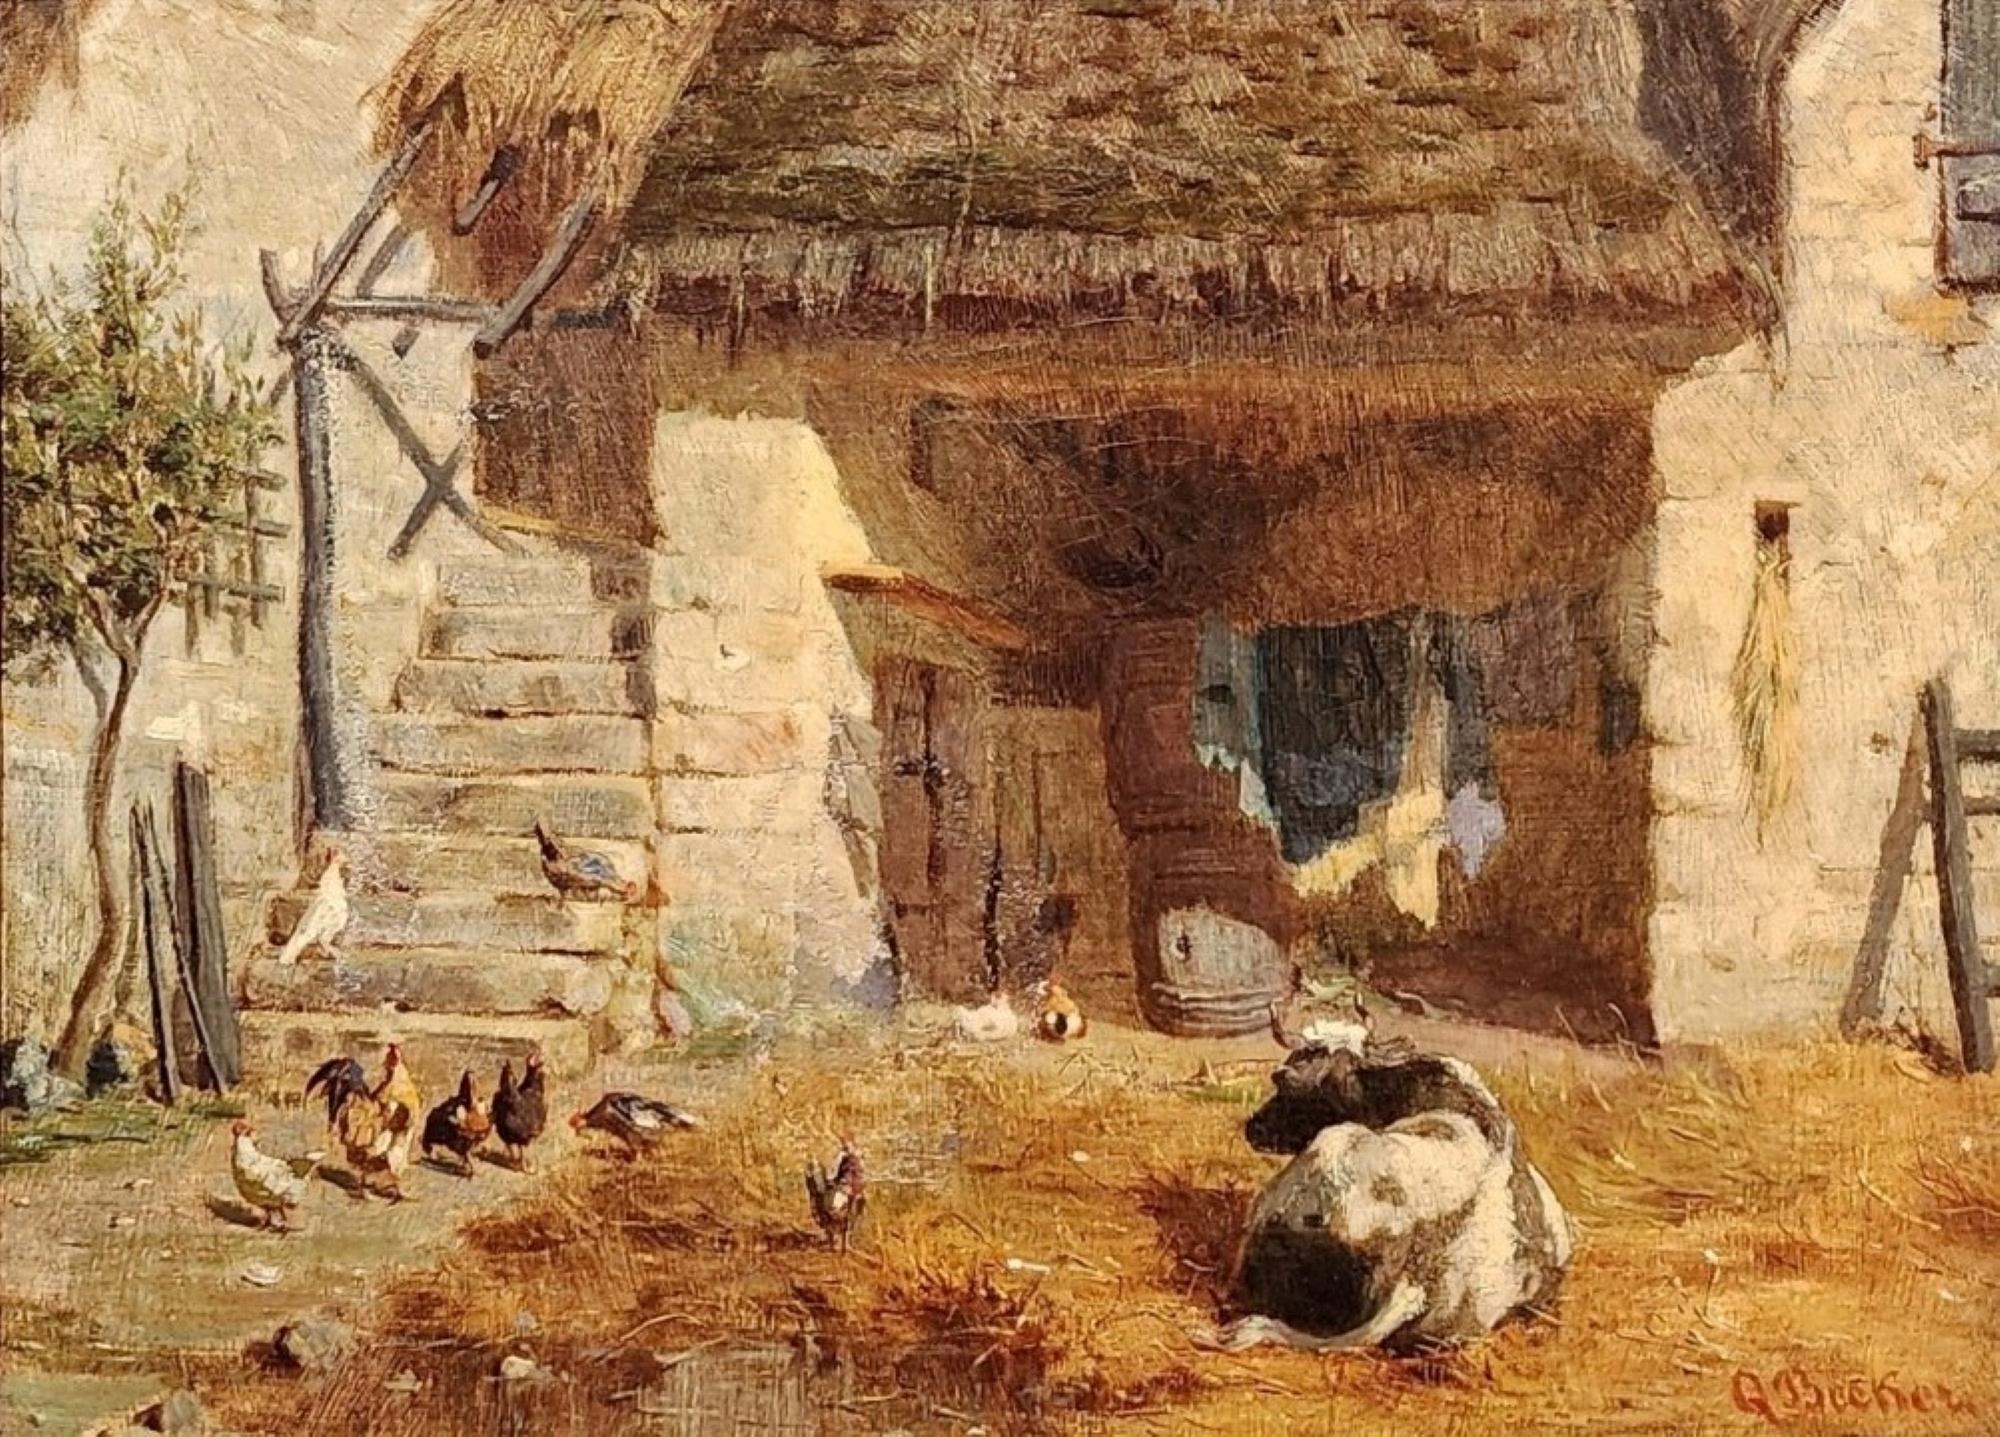 In The Barnyard, Late 19th Century Farm Scene, Cows, Chickens - Painting by Albert Q. Becker